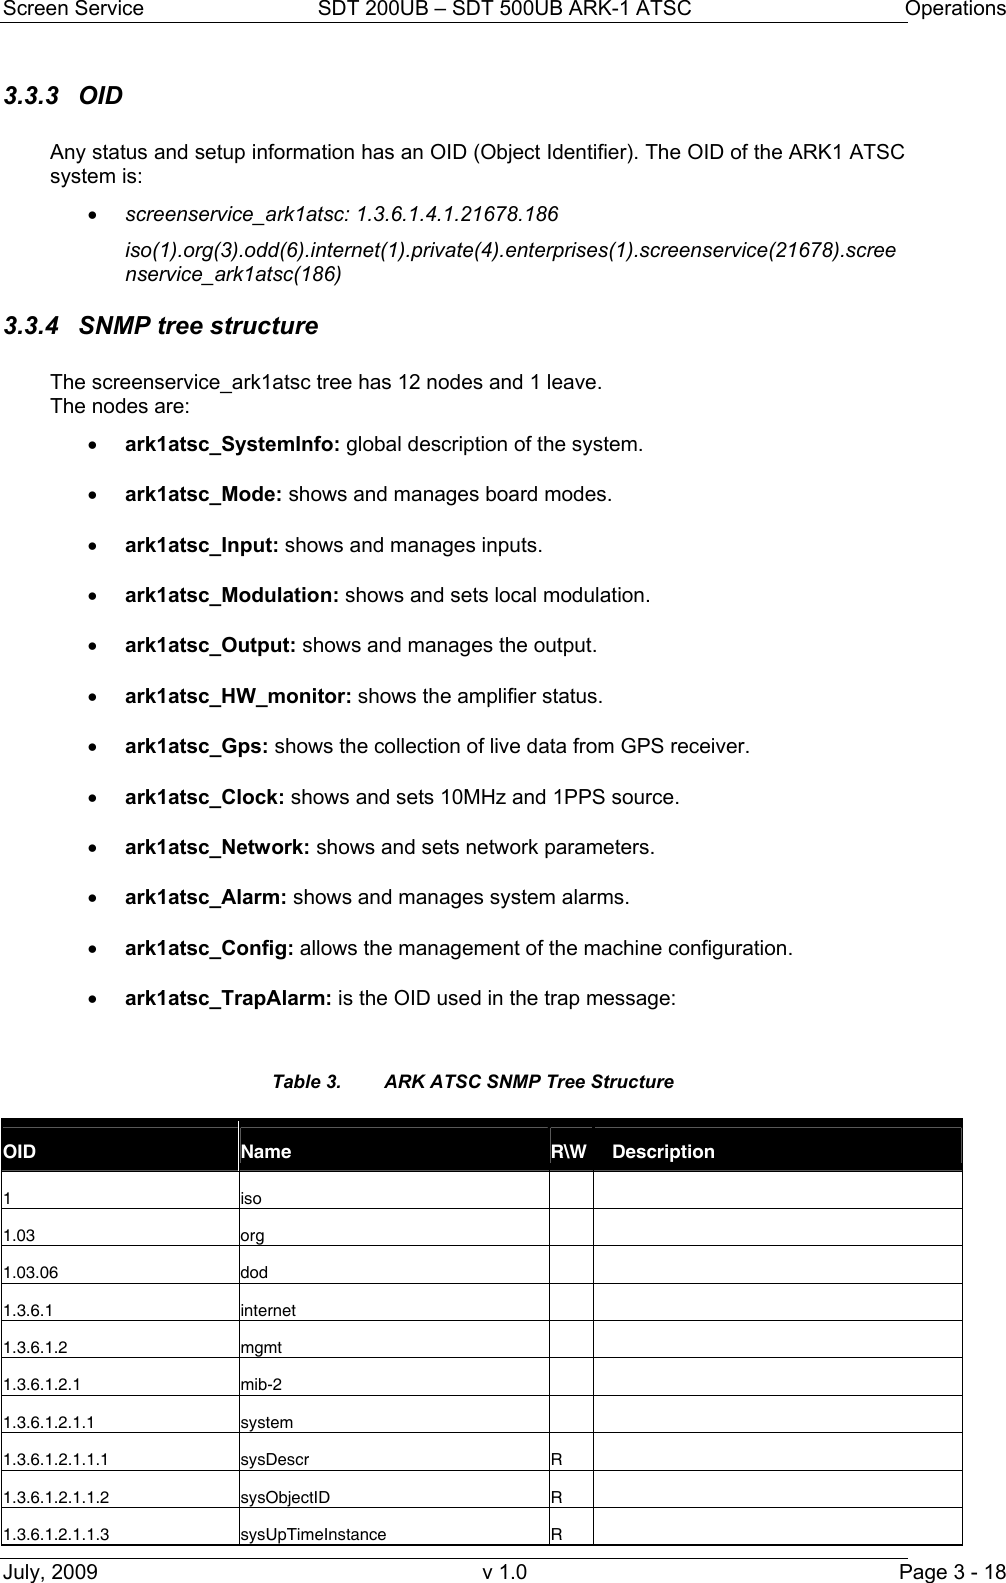 Screen Service  SDT 200UB – SDT 500UB ARK-1 ATSC  Operations July, 2009  v 1.0  Page 3 - 18 3.3.3 OID  Any status and setup information has an OID (Object Identifier). The OID of the ARK1 ATSC system is: • screenservice_ark1atsc: 1.3.6.1.4.1.21678.186 iso(1).org(3).odd(6).internet(1).private(4).enterprises(1).screenservice(21678).screenservice_ark1atsc(186) 3.3.4  SNMP tree structure   The screenservice_ark1atsc tree has 12 nodes and 1 leave. The nodes are: • ark1atsc_SystemInfo: global description of the system. • ark1atsc_Mode: shows and manages board modes. • ark1atsc_Input: shows and manages inputs. • ark1atsc_Modulation: shows and sets local modulation. • ark1atsc_Output: shows and manages the output. • ark1atsc_HW_monitor: shows the amplifier status. • ark1atsc_Gps: shows the collection of live data from GPS receiver. • ark1atsc_Clock: shows and sets 10MHz and 1PPS source. • ark1atsc_Network: shows and sets network parameters. • ark1atsc_Alarm: shows and manages system alarms. • ark1atsc_Config: allows the management of the machine configuration. • ark1atsc_TrapAlarm: is the OID used in the trap message:  Table 3.  ARK ATSC SNMP Tree Structure OID  Name  R\W  Description 1 iso    1.03 org    1.03.06 dod    1.3.6.1 internet    1.3.6.1.2 mgmt    1.3.6.1.2.1 mib-2    1.3.6.1.2.1.1 system    1.3.6.1.2.1.1.1 sysDescr  R  1.3.6.1.2.1.1.2 sysObjectID  R  1.3.6.1.2.1.1.3 sysUpTimeInstance  R  